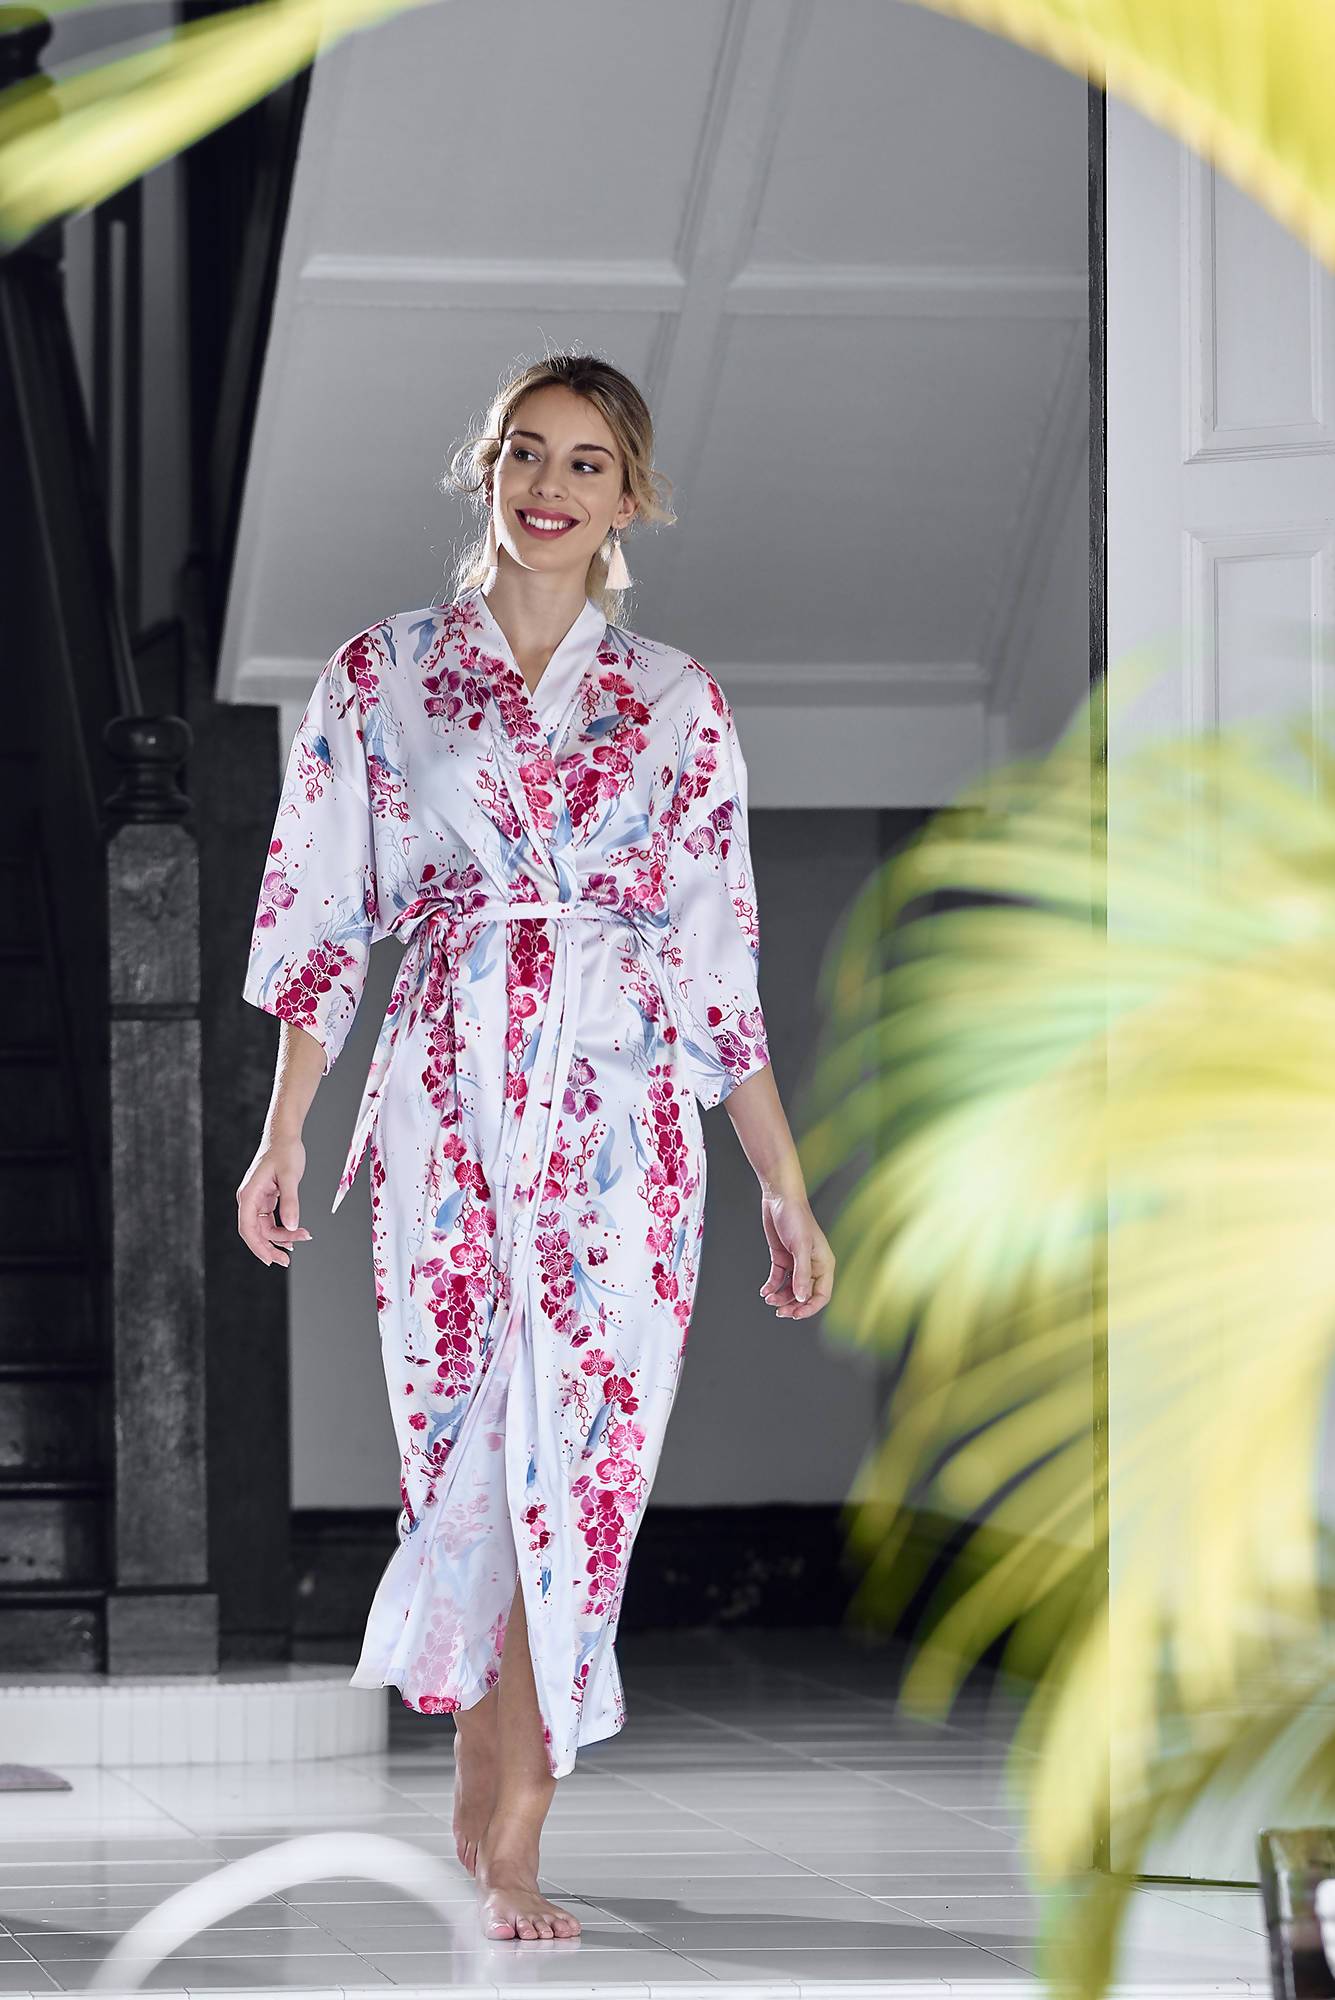 Orchid Kimono Robe (Ankle) - Sleepwear for Women - The Mariposa Collection - Naiise